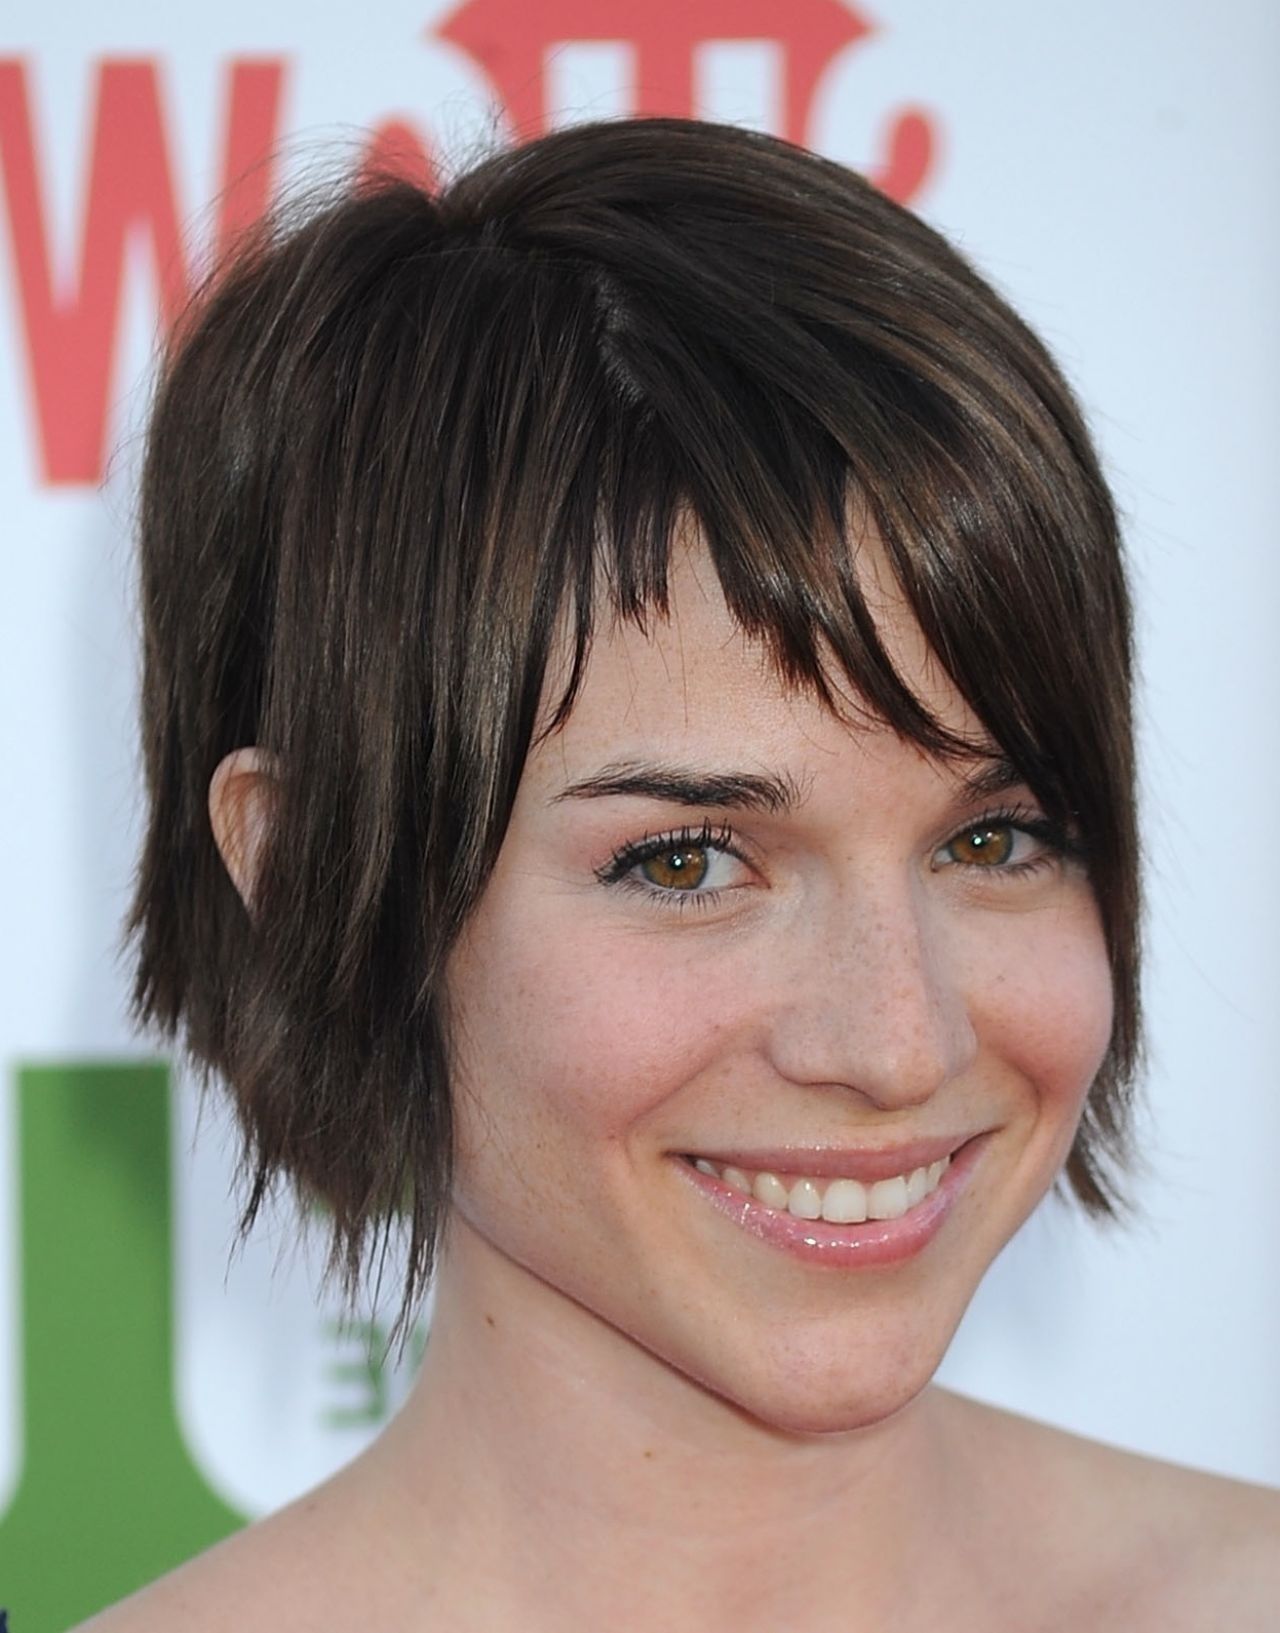 70+ Hot Pictures Of Renee Felice Smith From NCIS Los Angeles Will Her Fans Mad 243